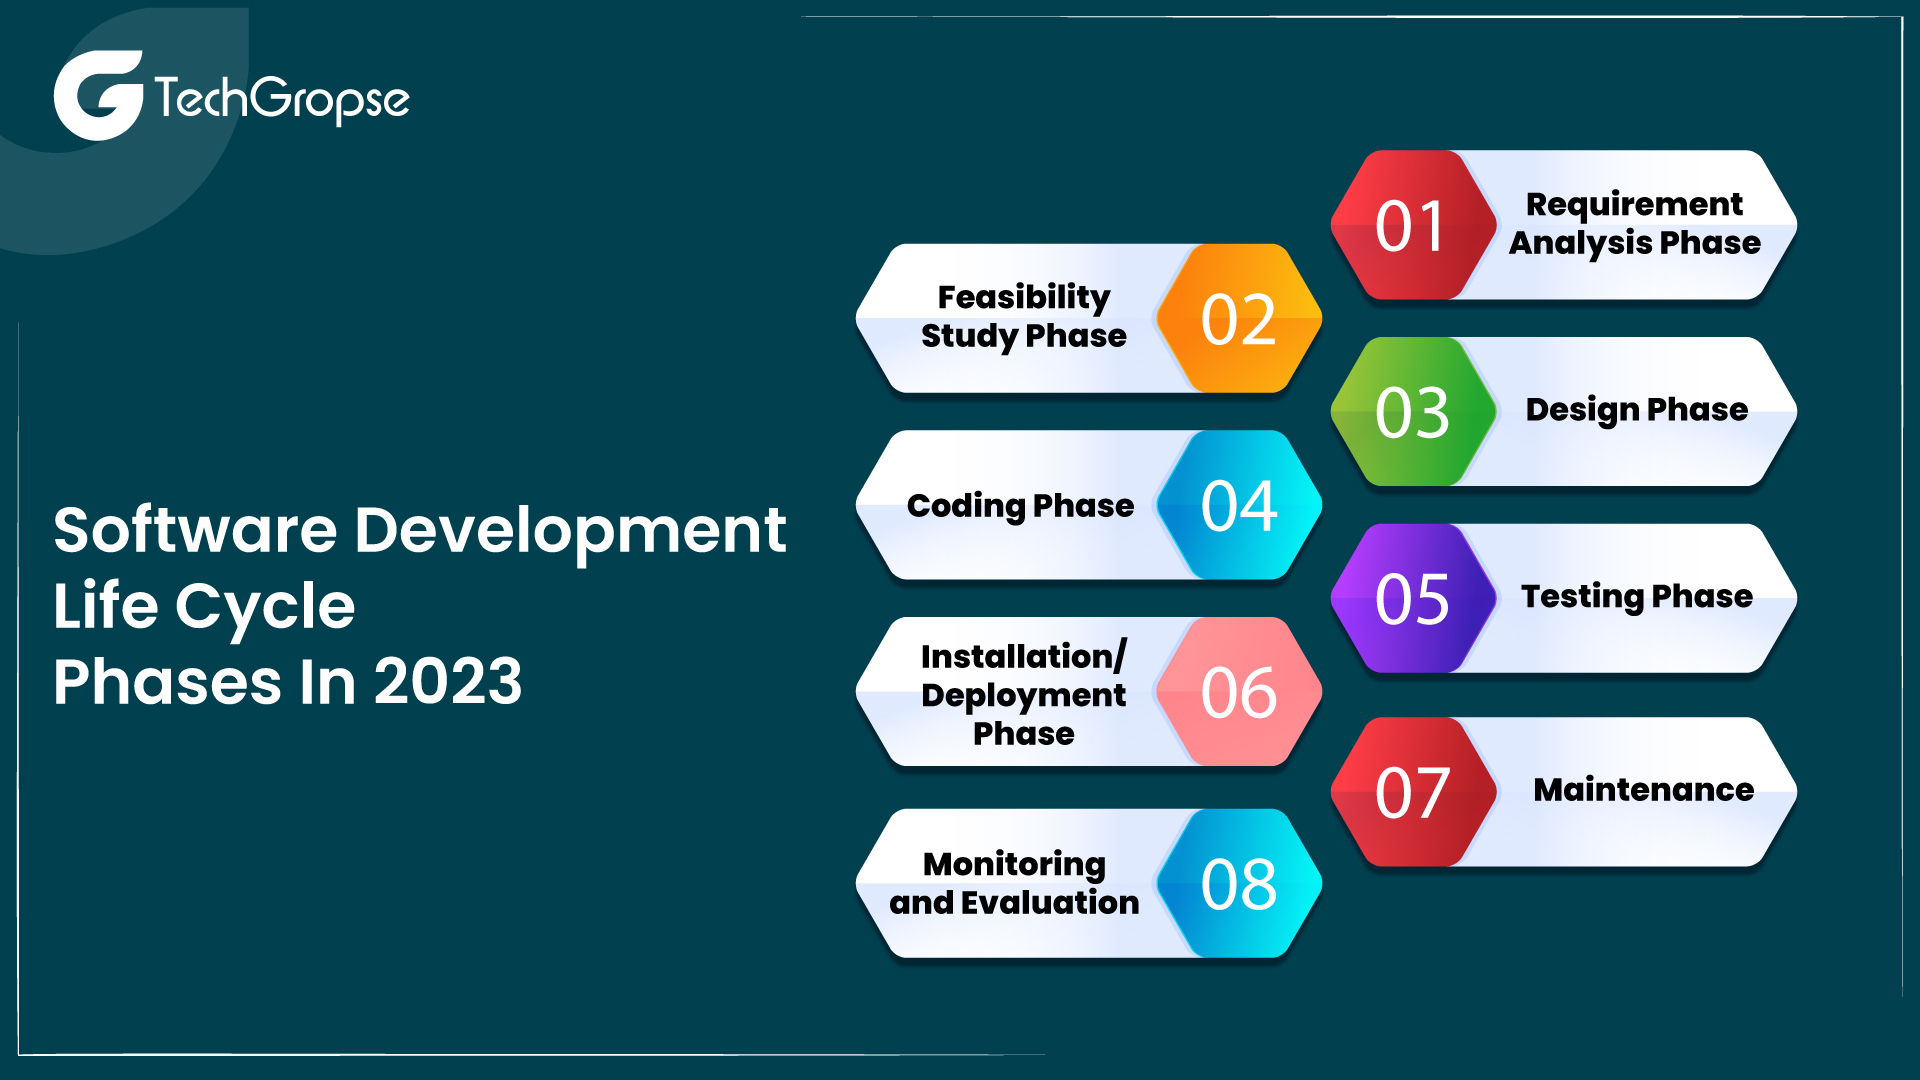 Software Development Life Cycle Phases In 2023